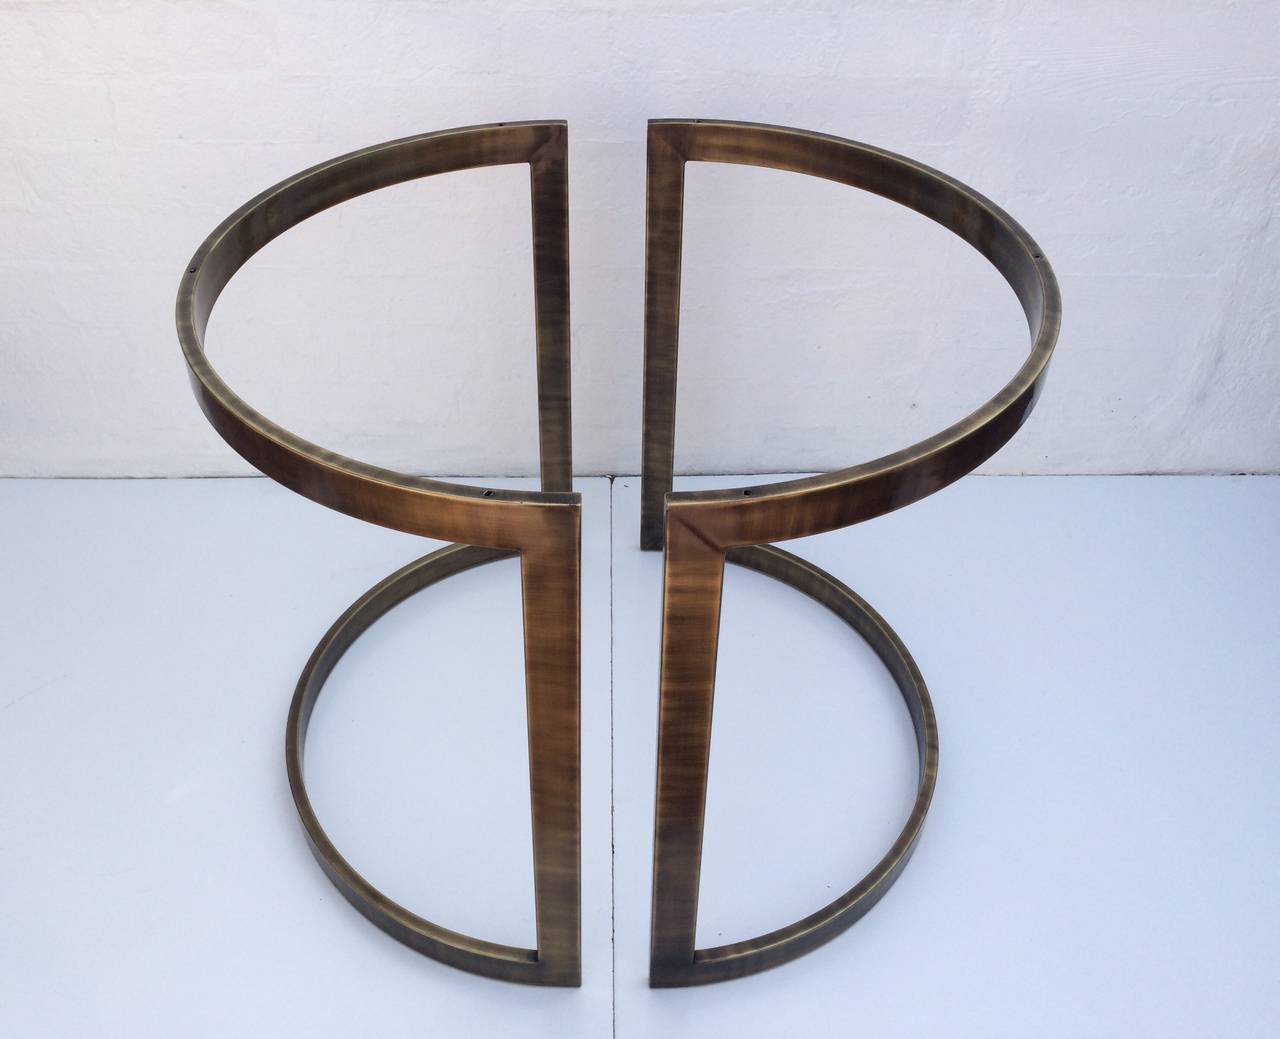 A two-piece antique brass dining table base designed by Milo Baughman. 
This attractive base can be set up many different ways as each half is a half circle and can support either a round or square glass top. 
Together the base measures 29